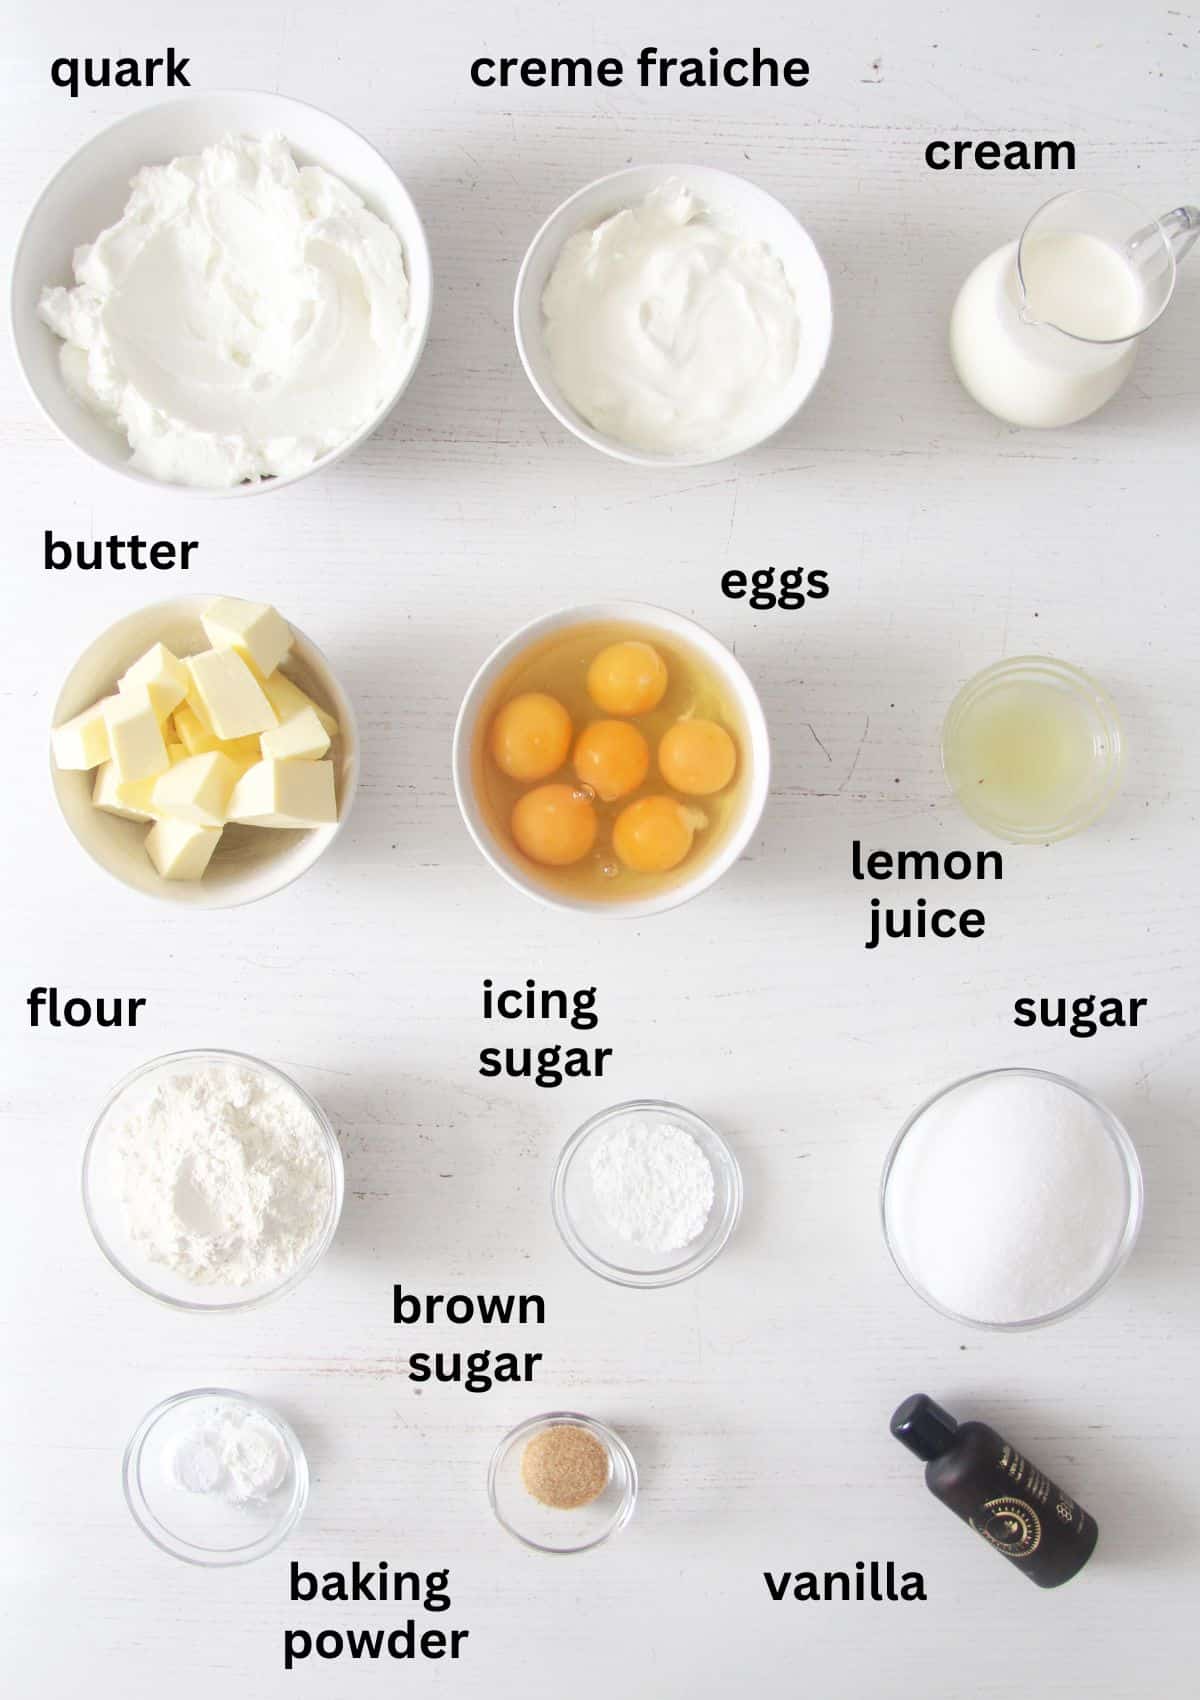 listed ingredients for making cheesecake without crust.